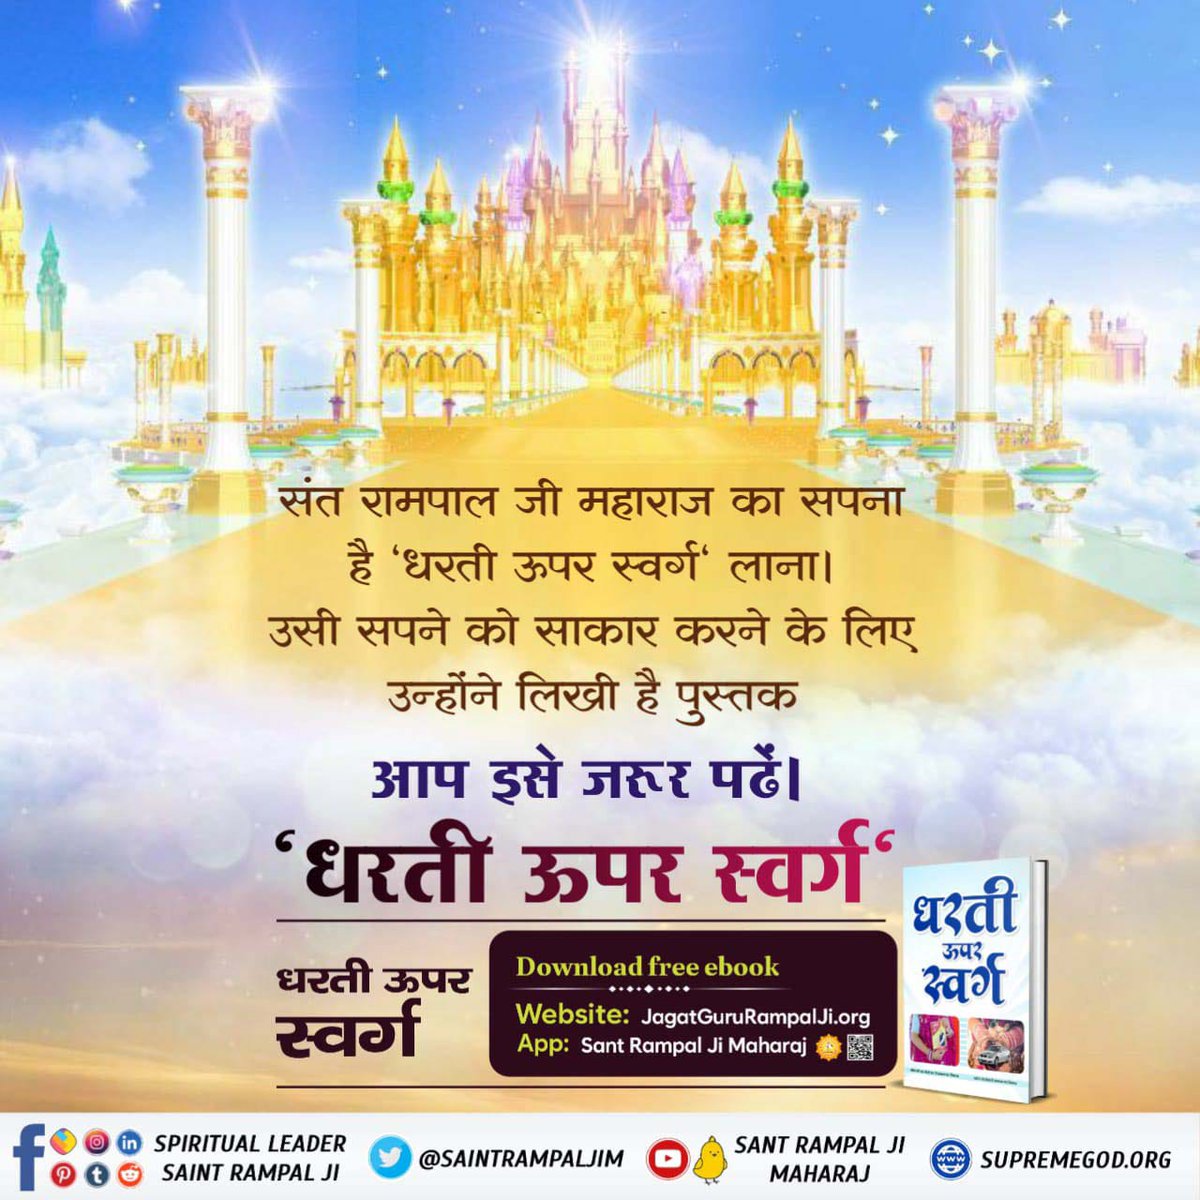 After hearing the thoughts of Sant Rampal Ji Maharaj, no one can ever consider either giving or taking dowry, the logic is so hard-hitting.
Sant Rampal Ji Maharaj
#wednesdaythought